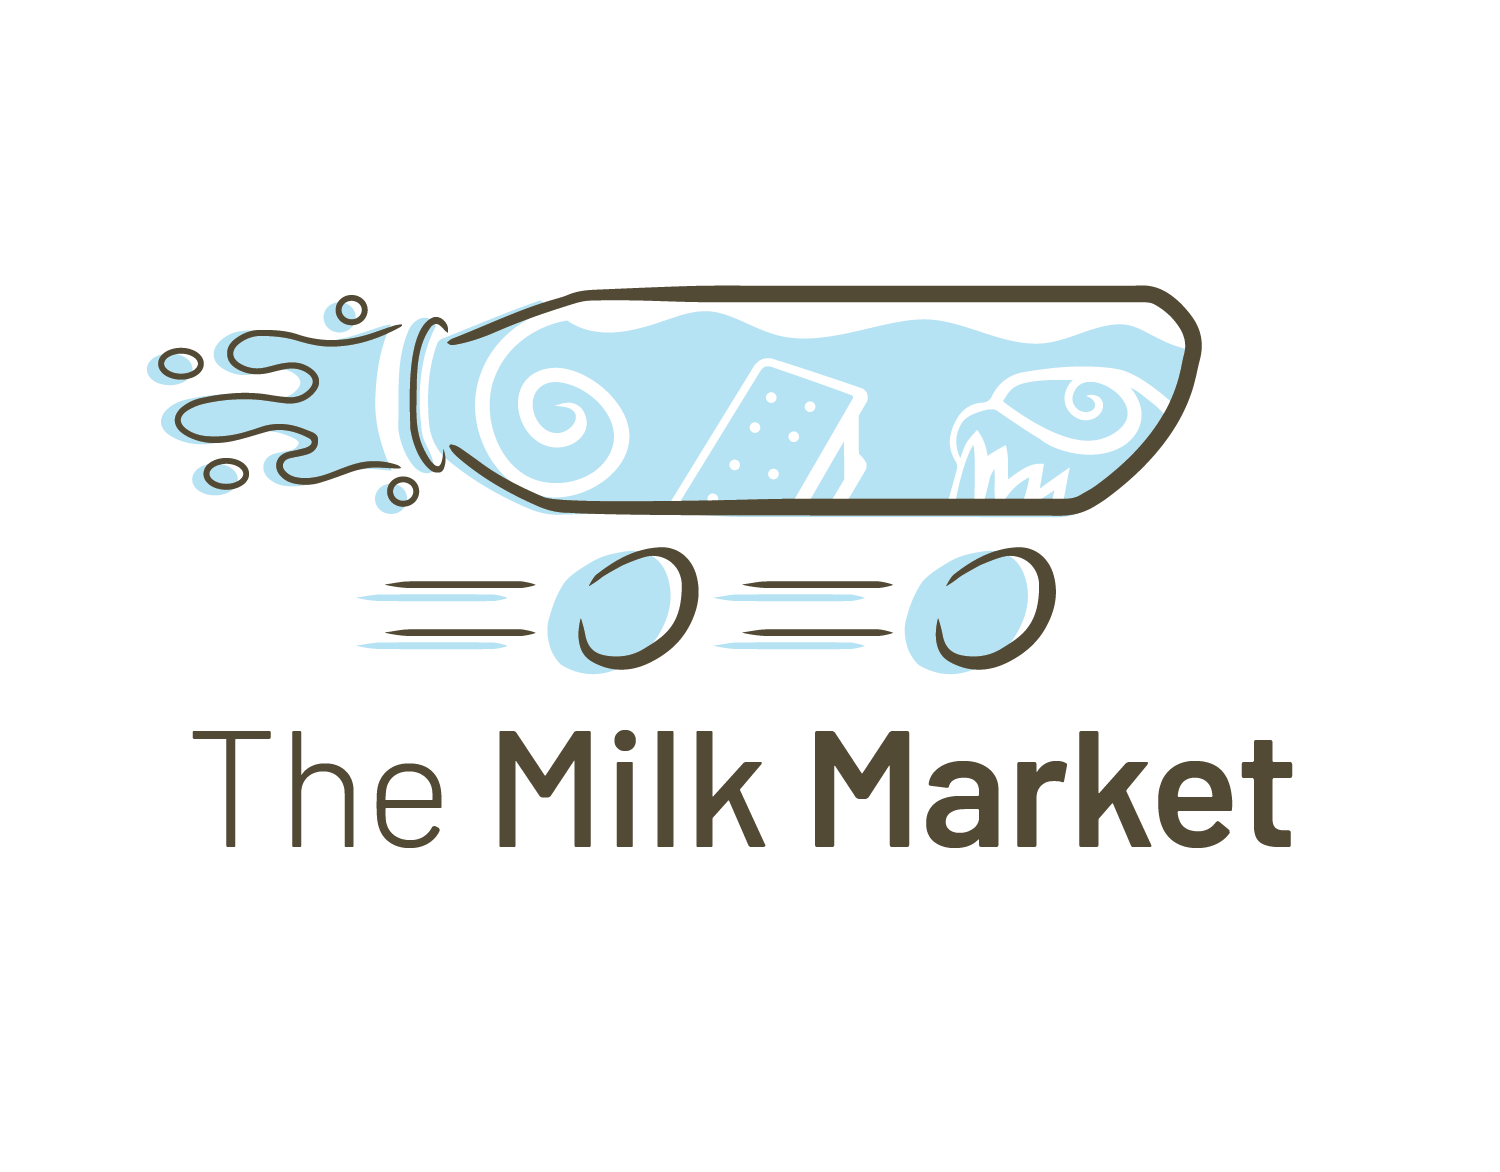 The Milk Market is the name attached to this logo. Written in a brown
				color, the phrase The Milk Market goes from thin to thick, with the word The
				being the thinnest word, and Market being the thickest word. Above the words 
				is a hybrid between a milk bottle and a car. Its movement direction is 
				towards the right. The color of the vehicle bleeds outside of the vehicle's 
				lineart  to where it's further left compared to the lineart in question.
				Inside the milk bottle is, from right to left, a cupcake,
				an ice cream sandwich, and a swirl. Just to the left of the milk bottle is 
				water coming out of the milk bottle.